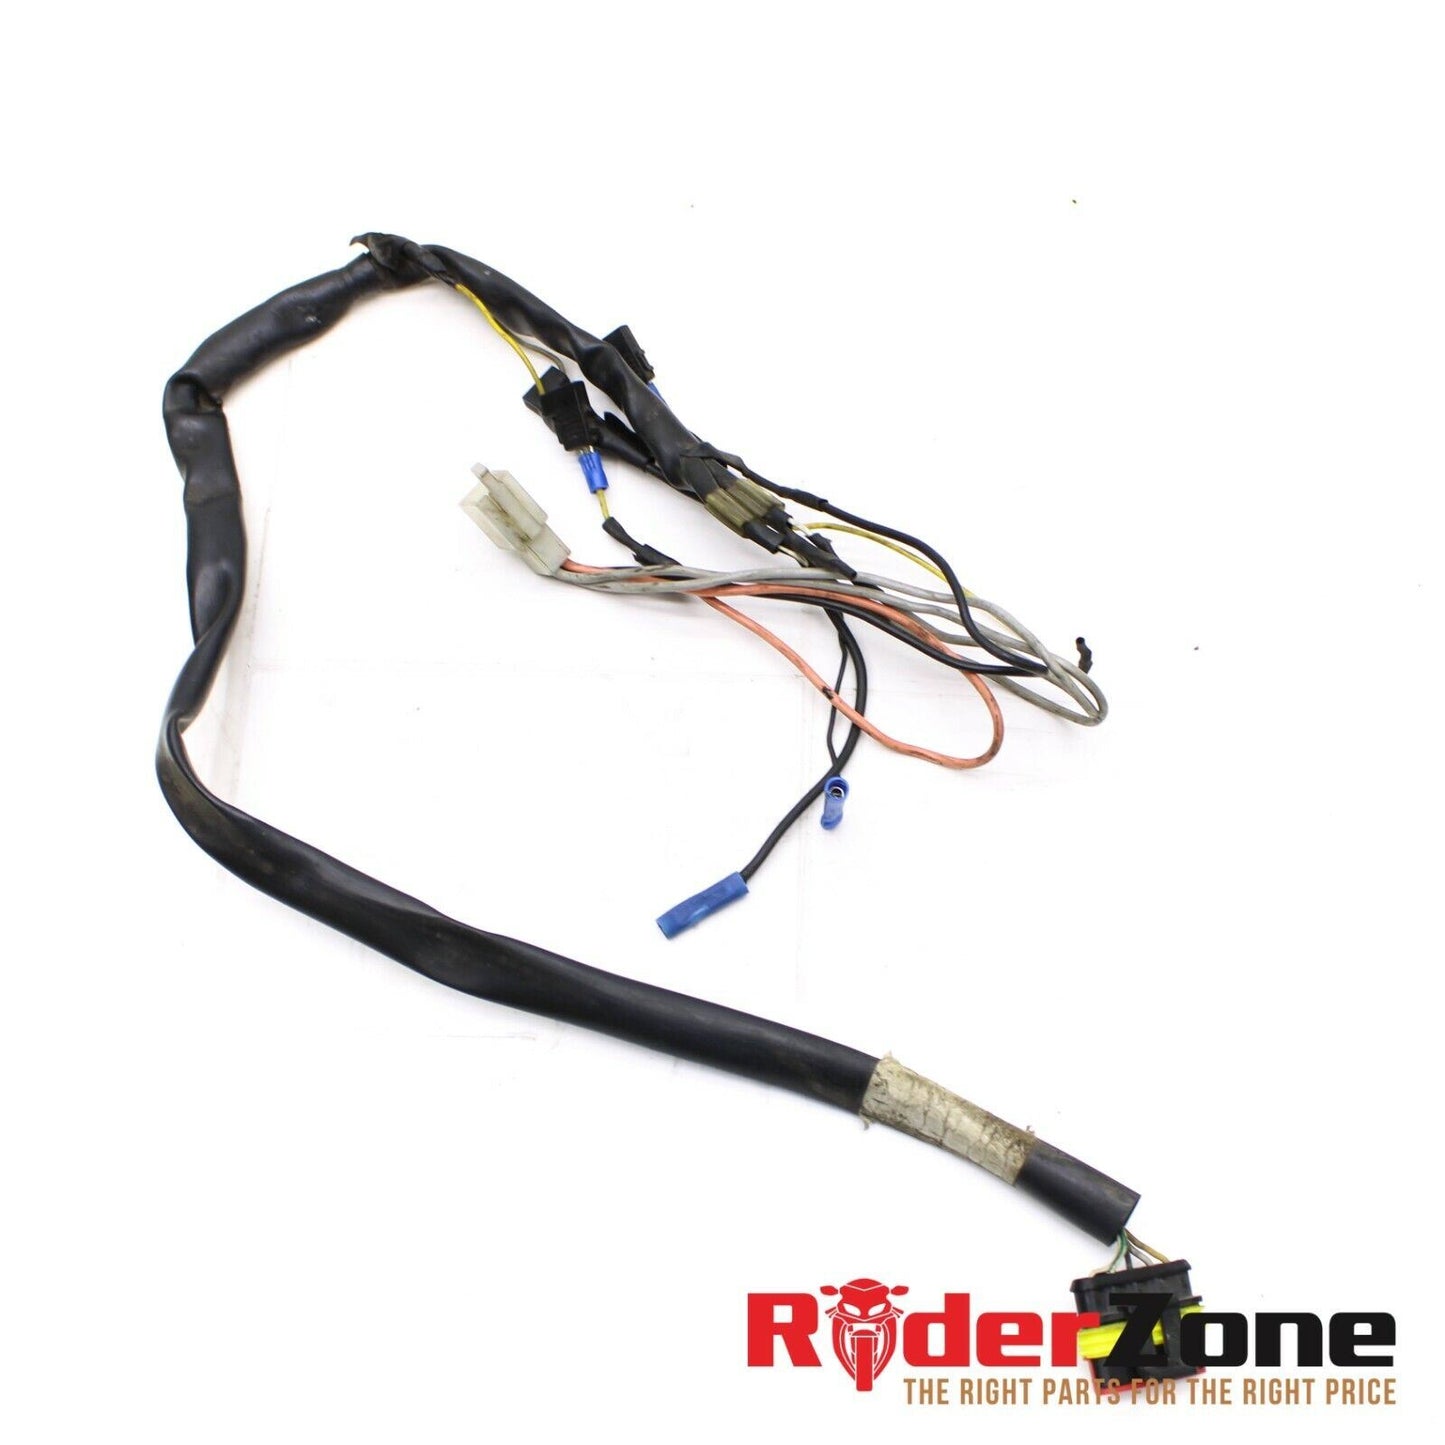 1999 - 2002 DUCATI MONSTER 750 TAIL LIGHT WIRING REAR BACK SUB HARNESS WIRE LOOM